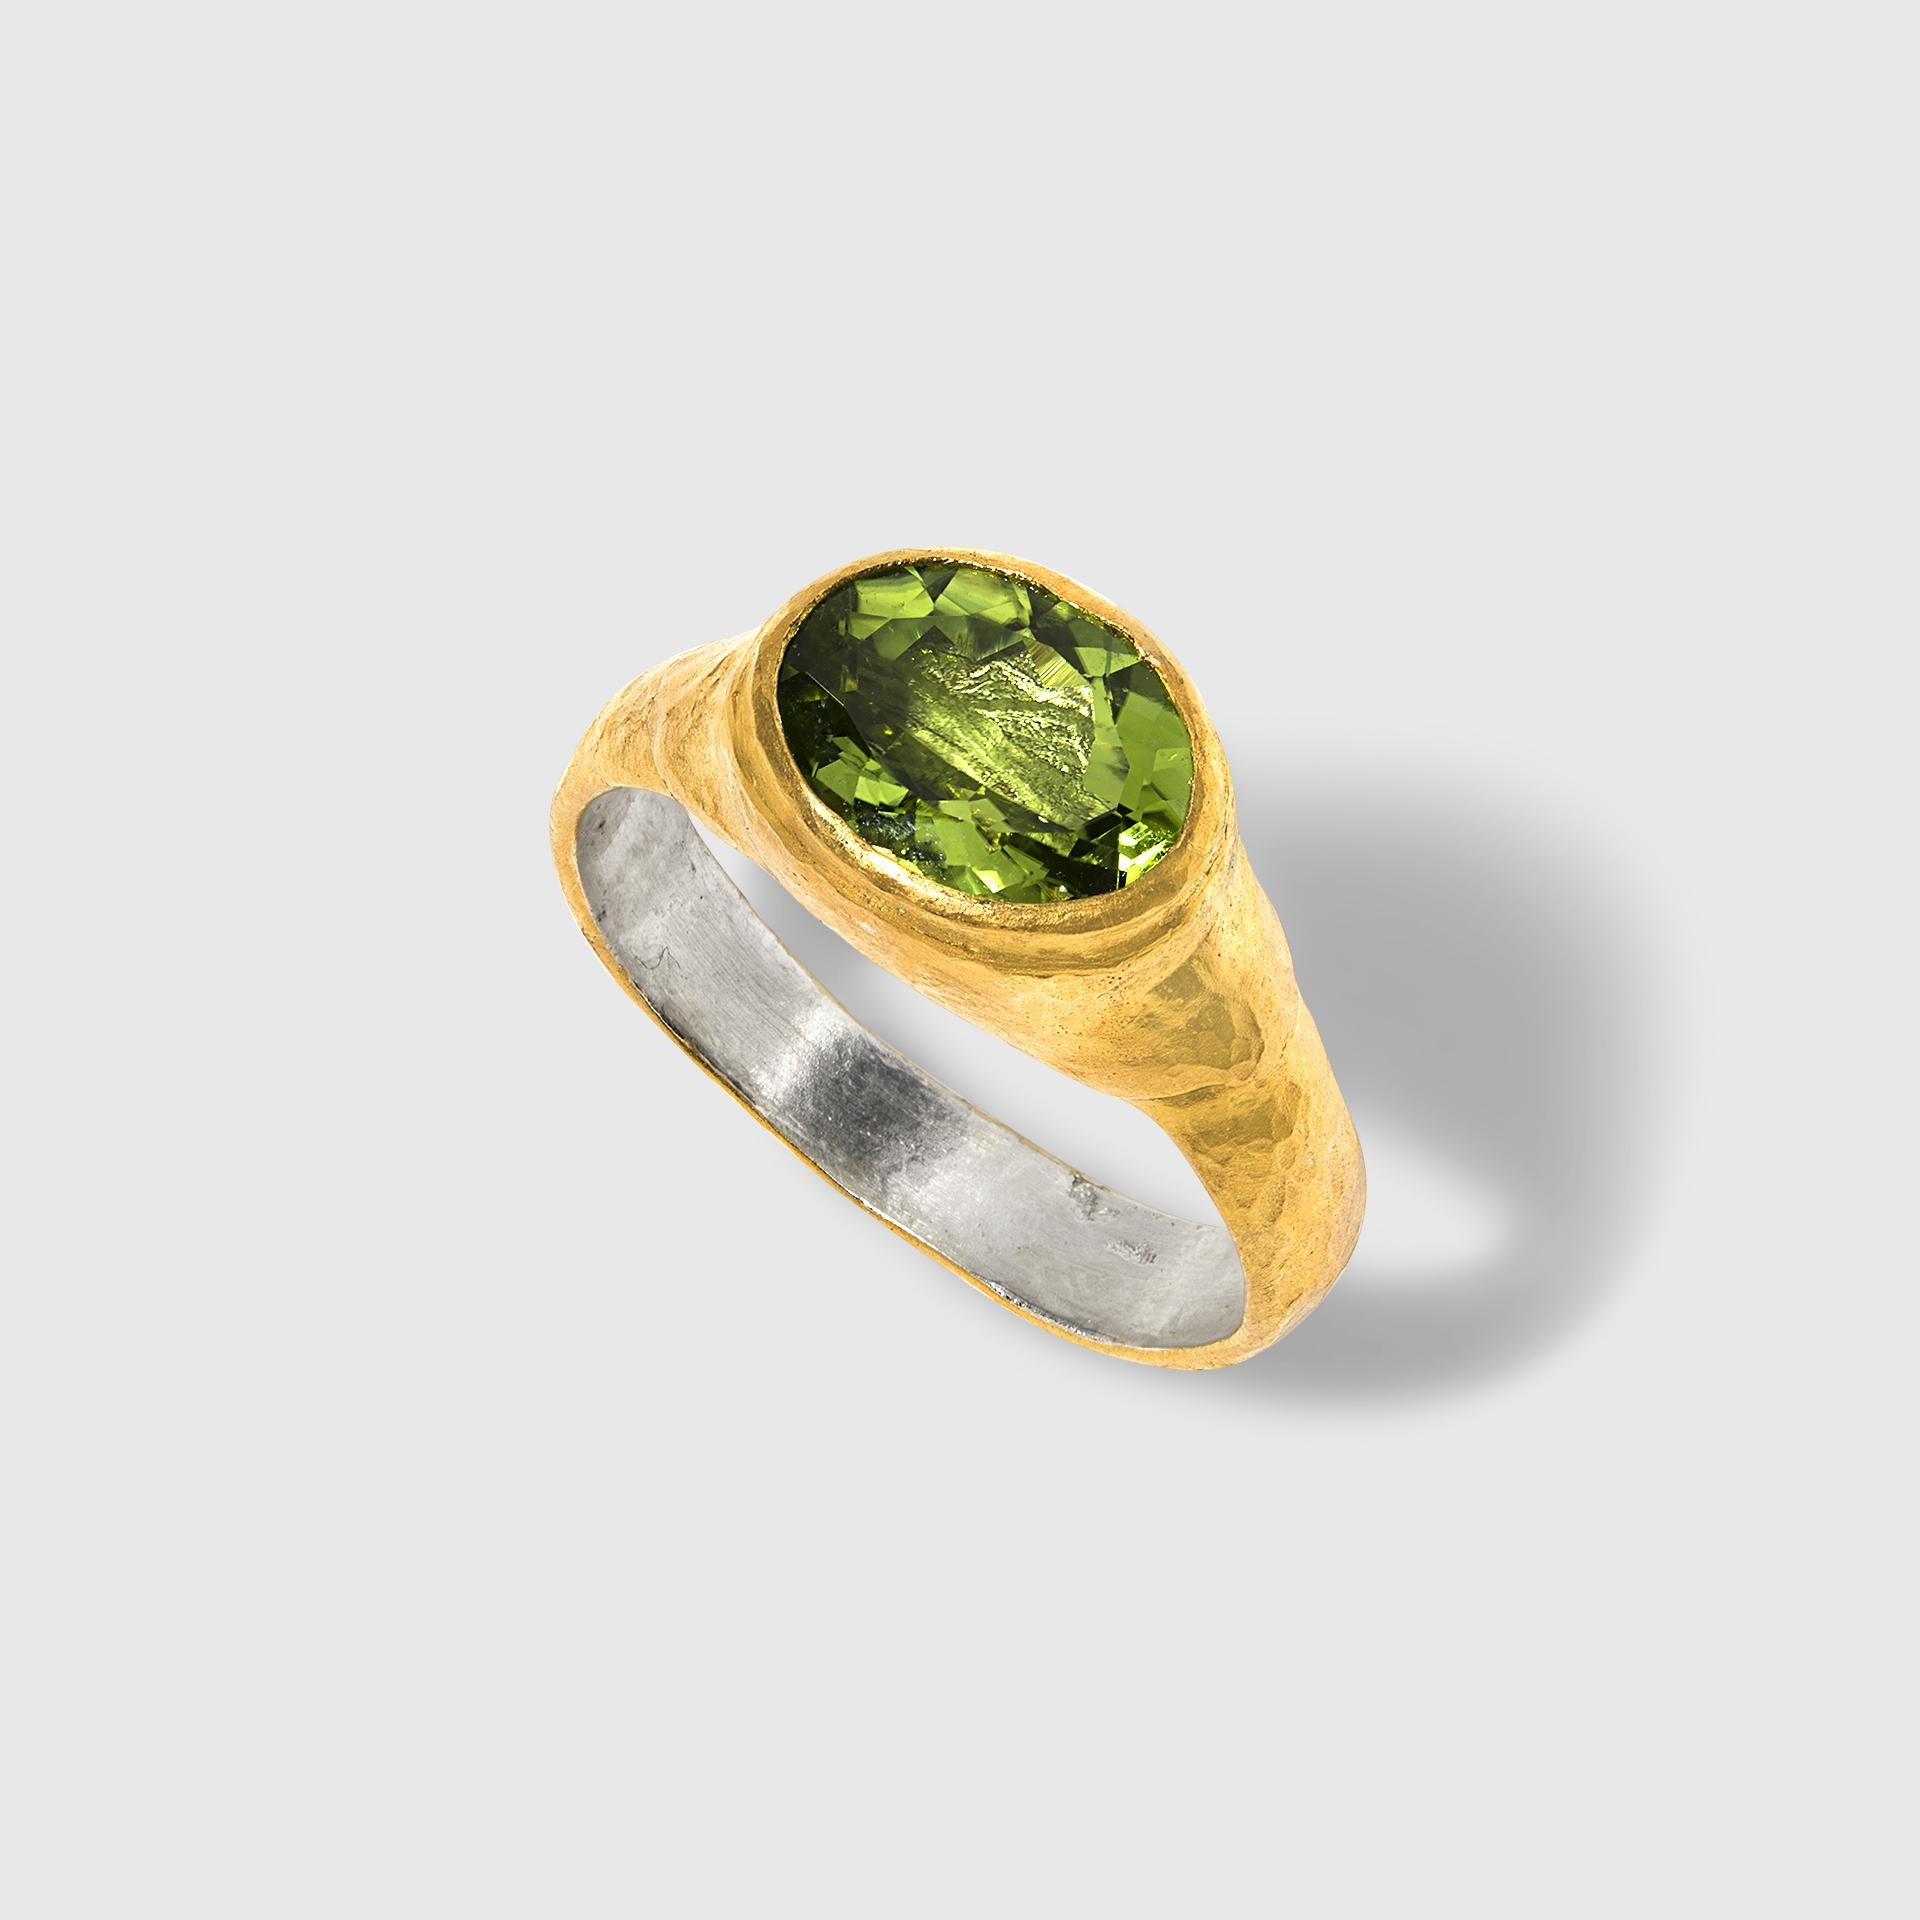 2.75ct Oval Peridot Ring with 24kt and Silver In New Condition For Sale In Bozeman, MT